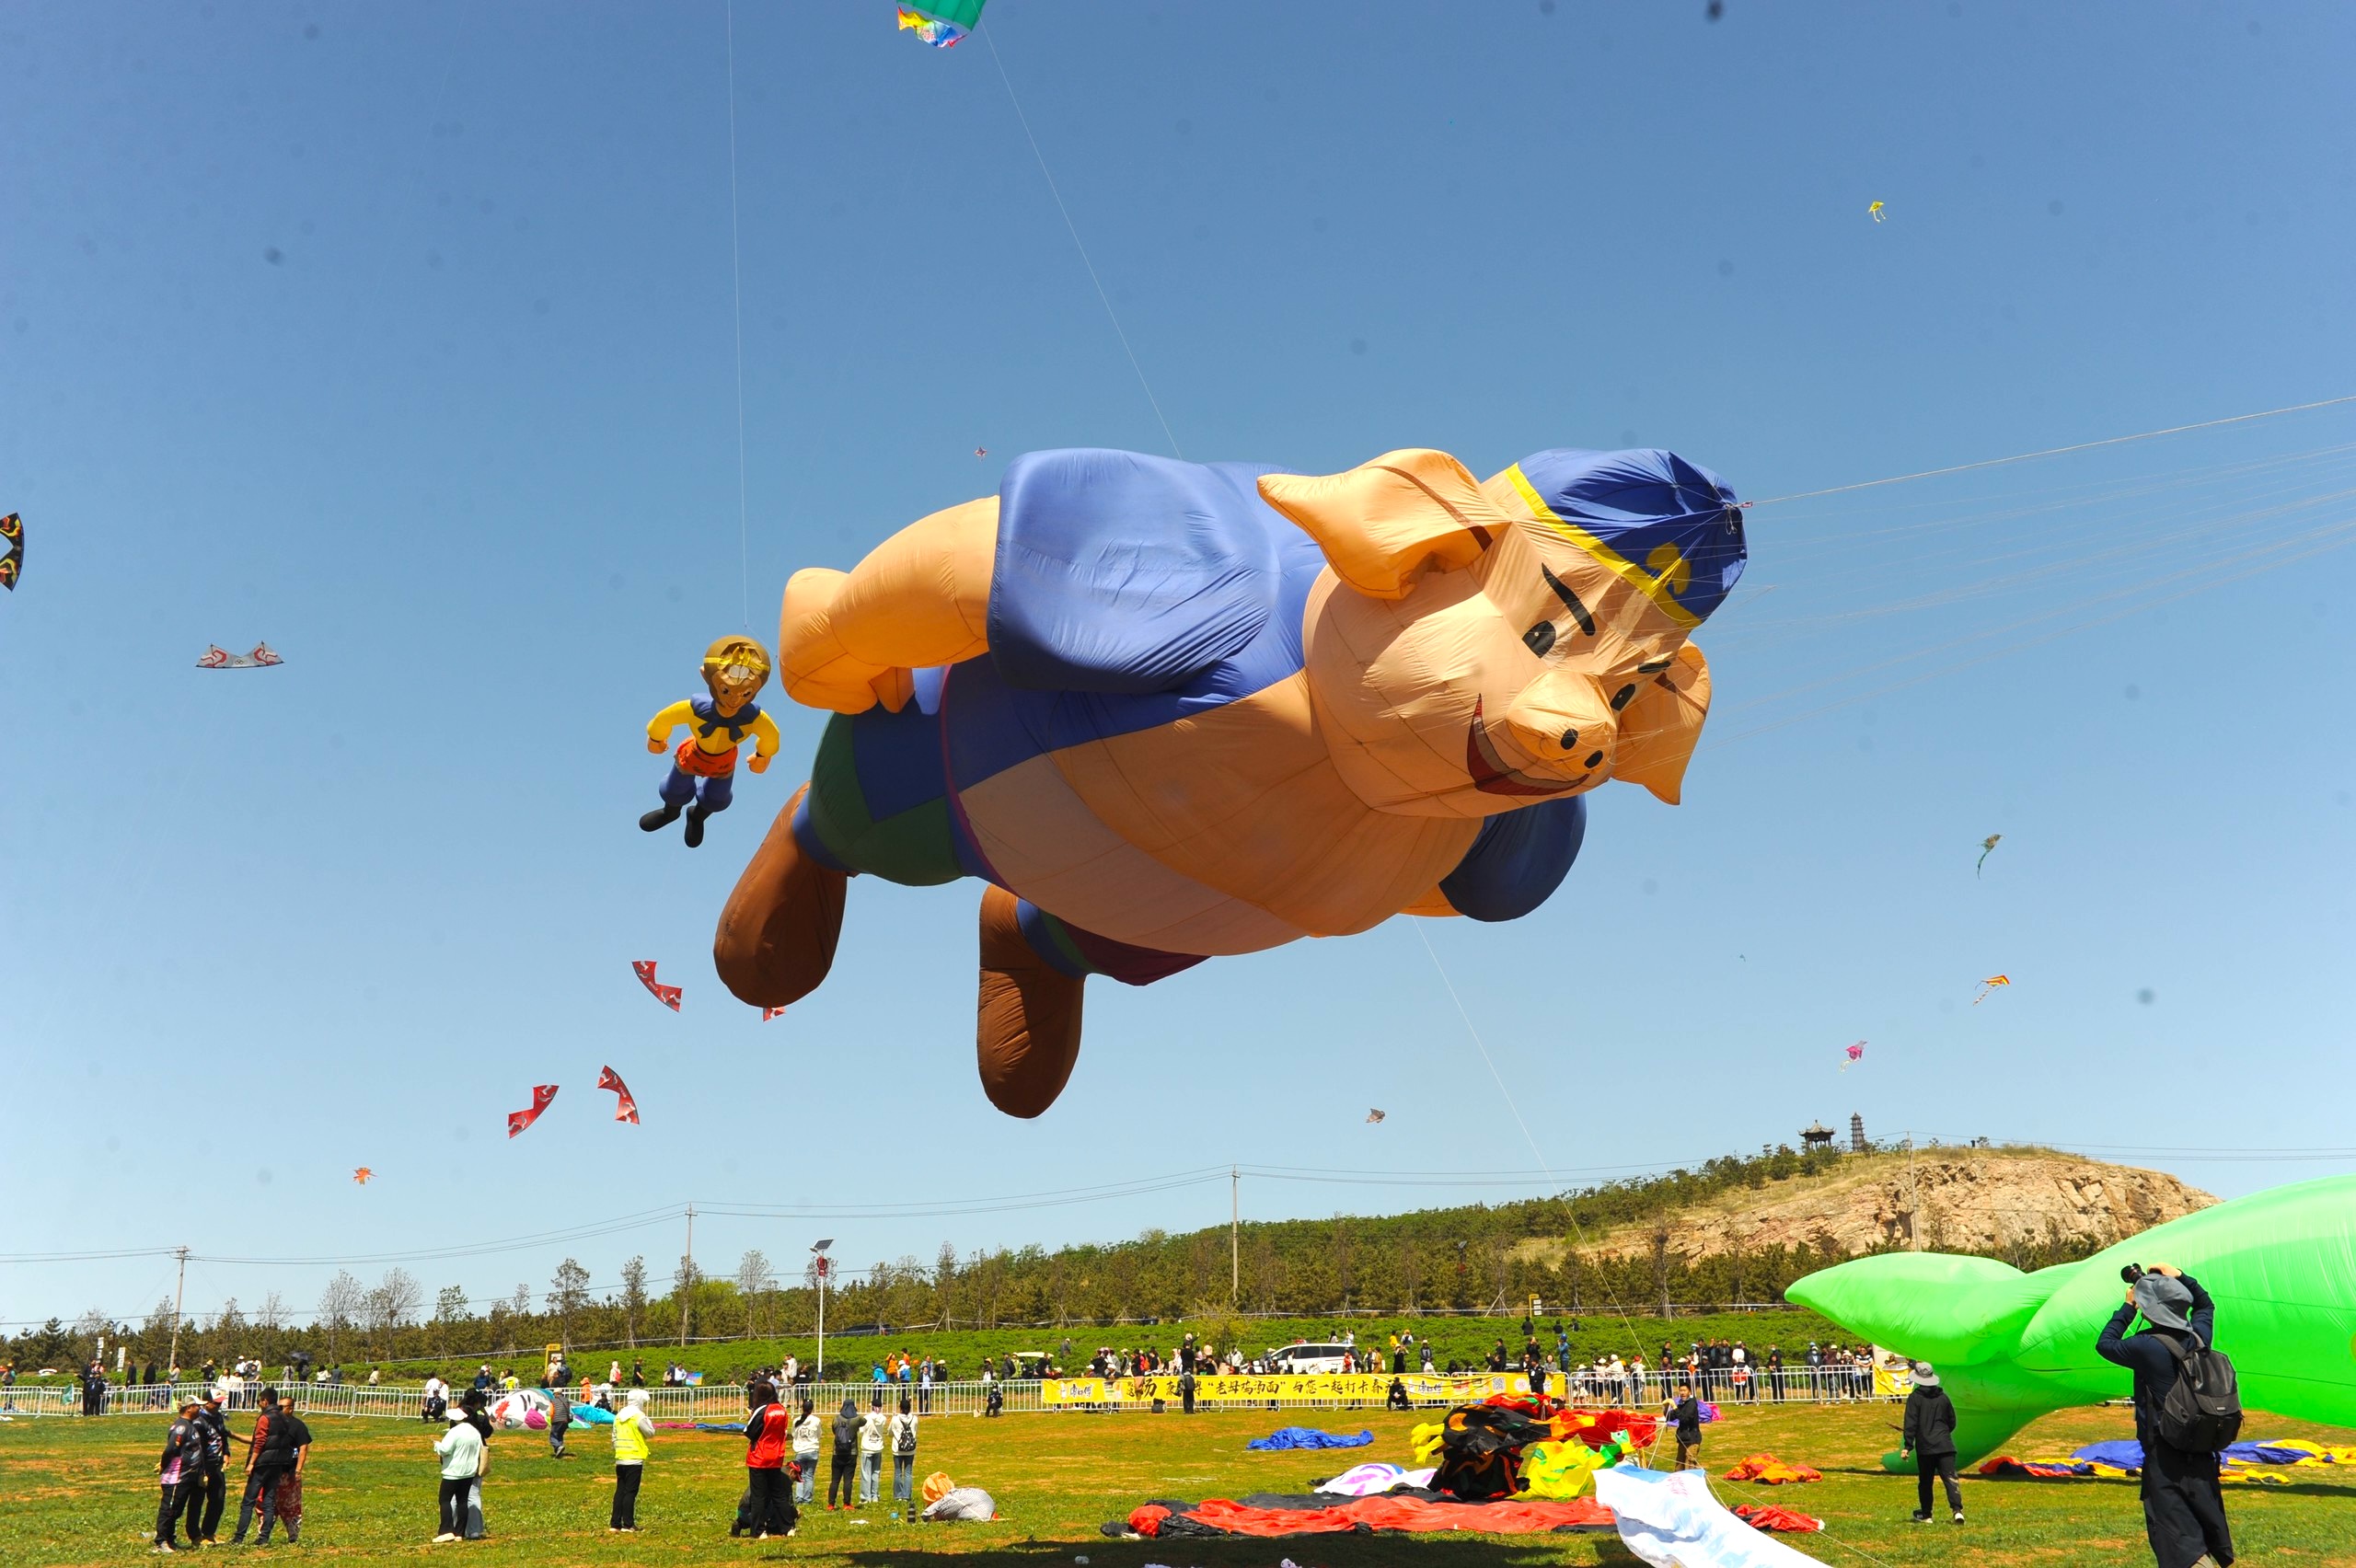 Kites in the shape of characters from the TV series adapted from the Chinese classic novel 